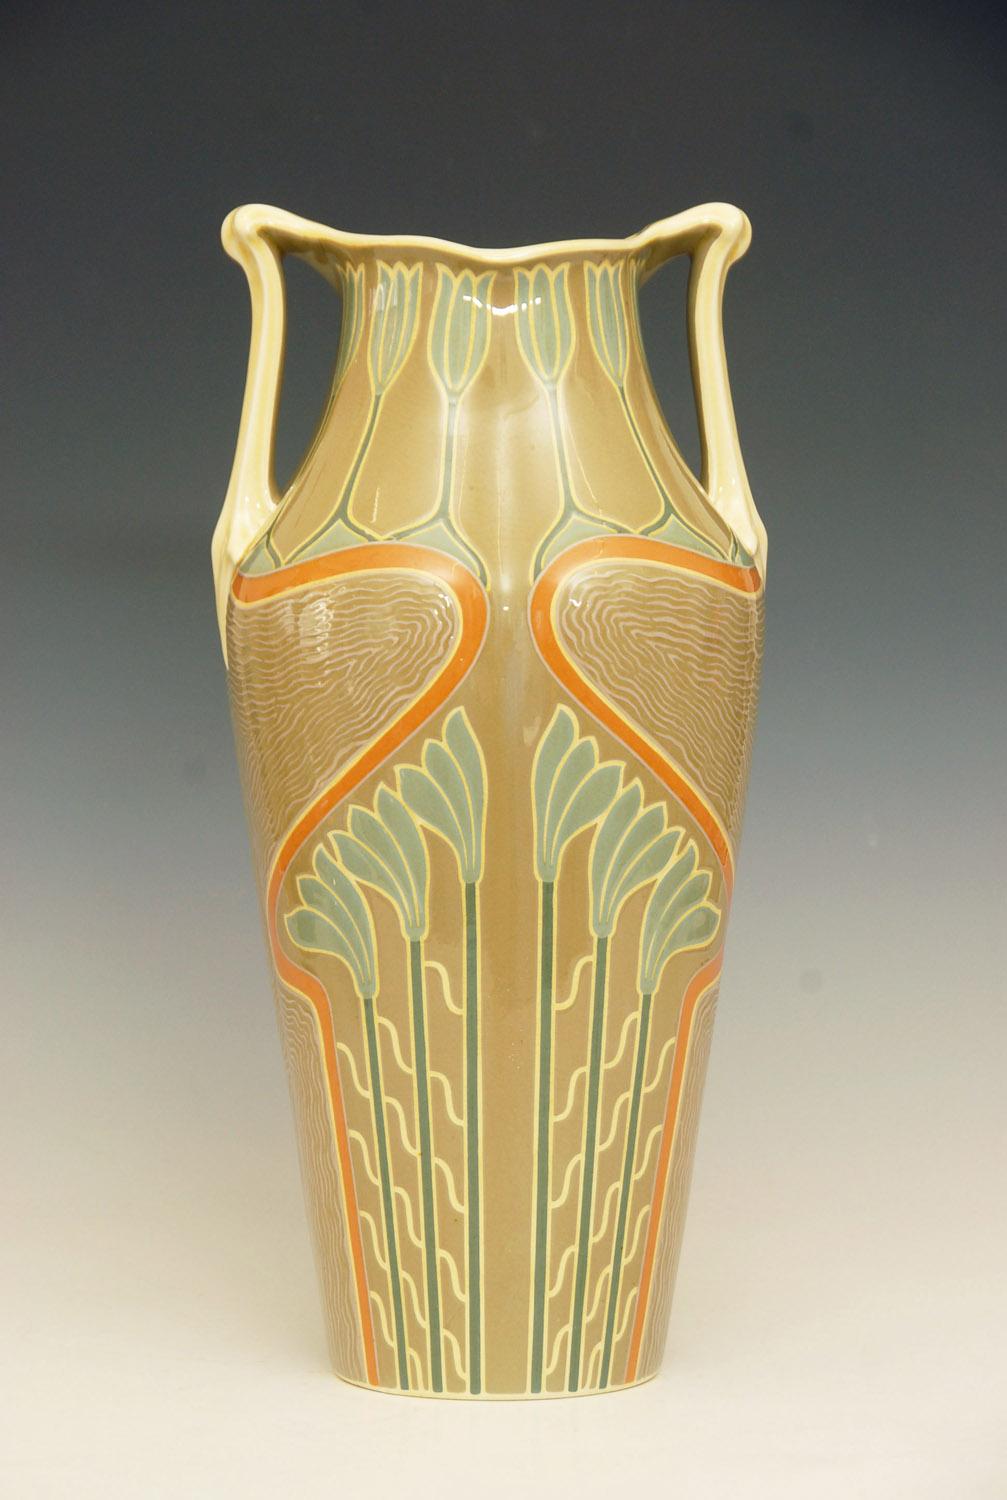 Large Art Noveau twin handled ceramic vase , hand painted , European.
Indistinct factory mark to base.
Price includes free shipping to anywhere in the world.